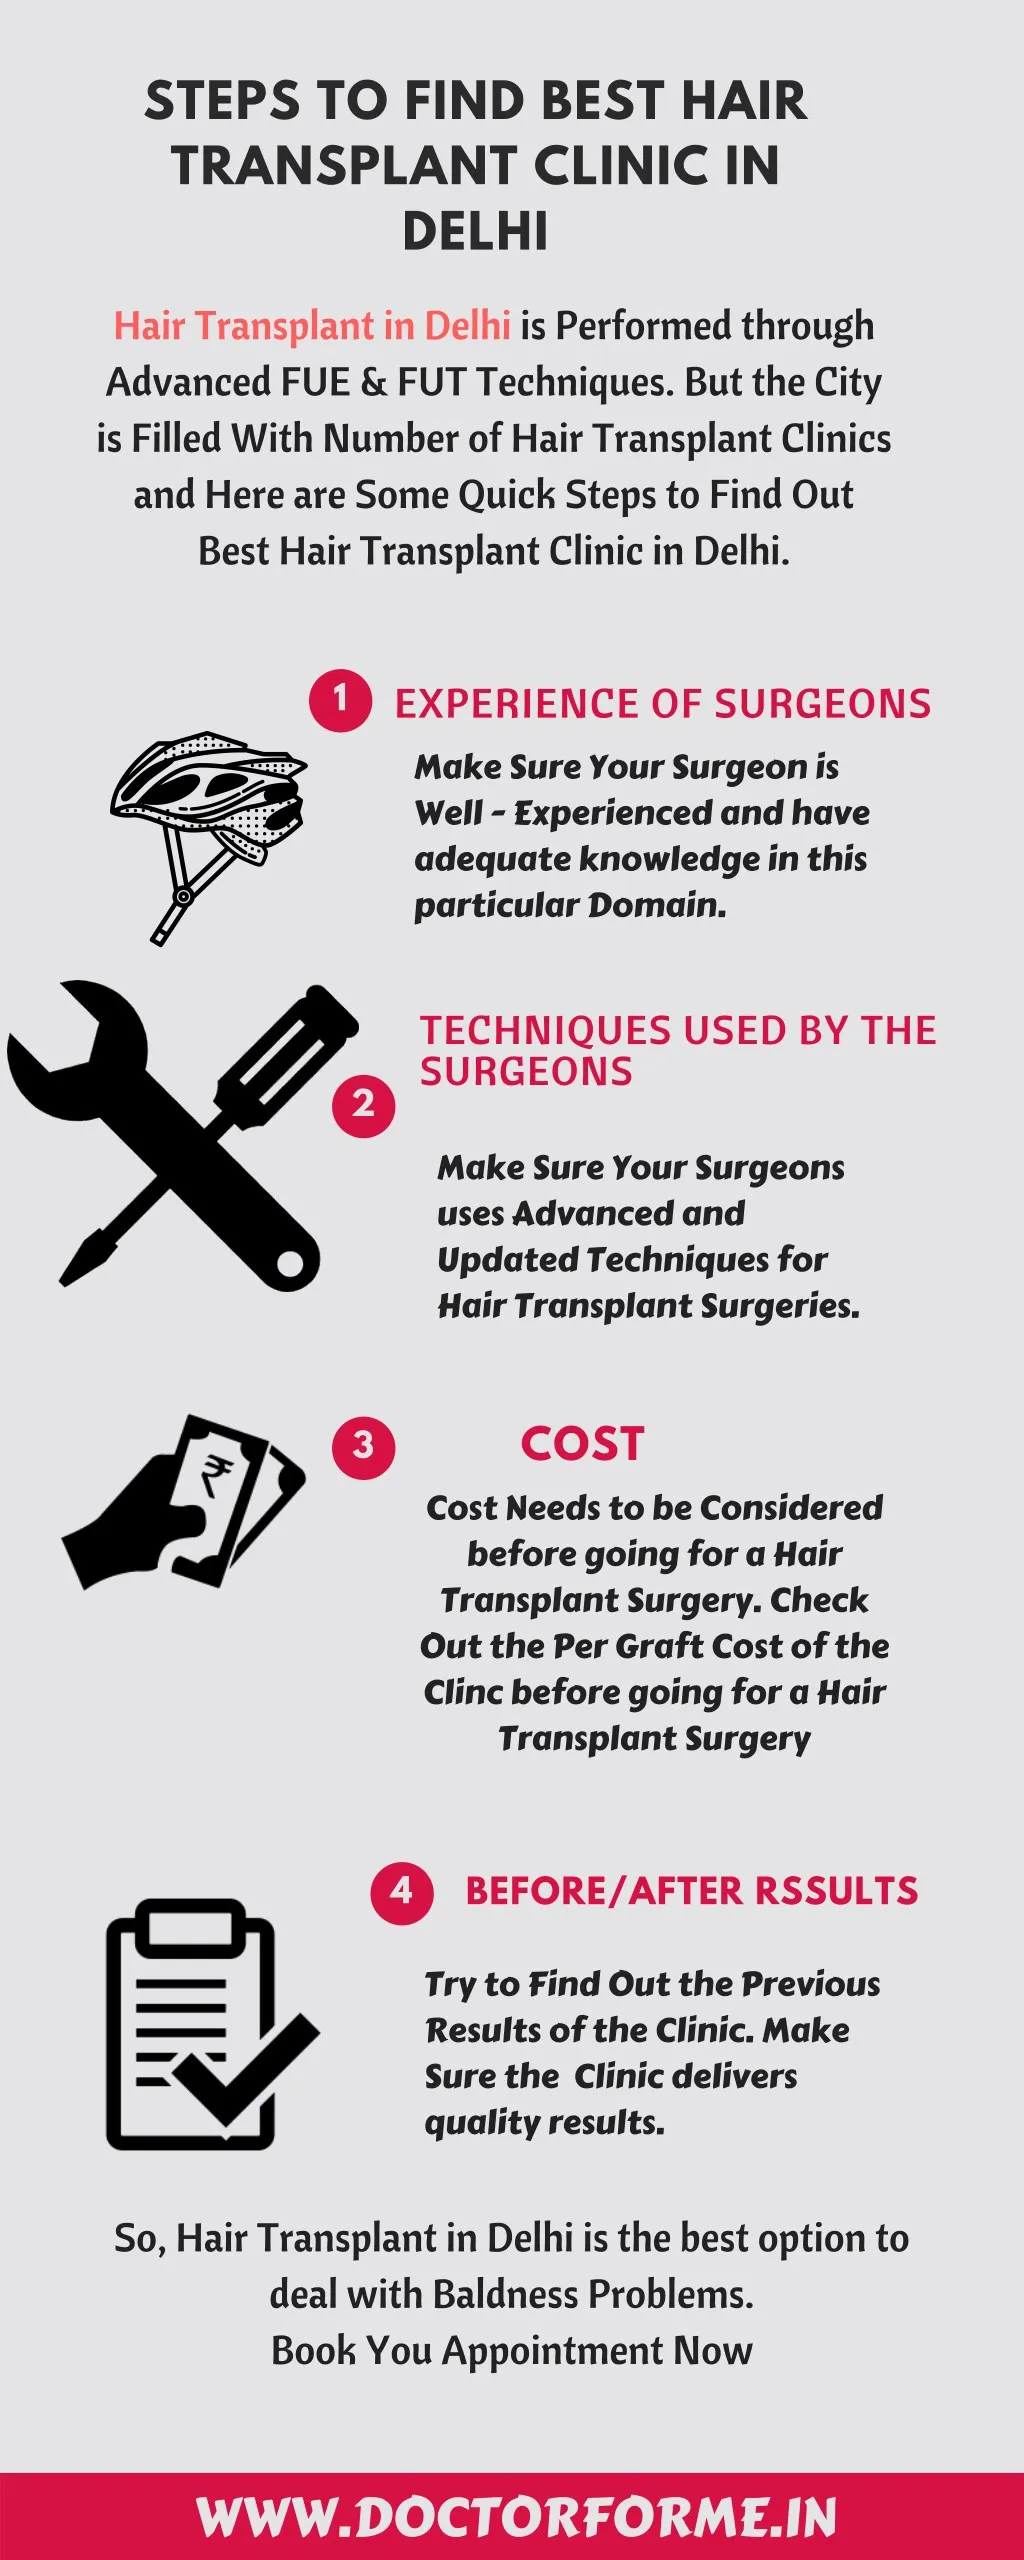 steps to find best hair transplant clinic in delhi